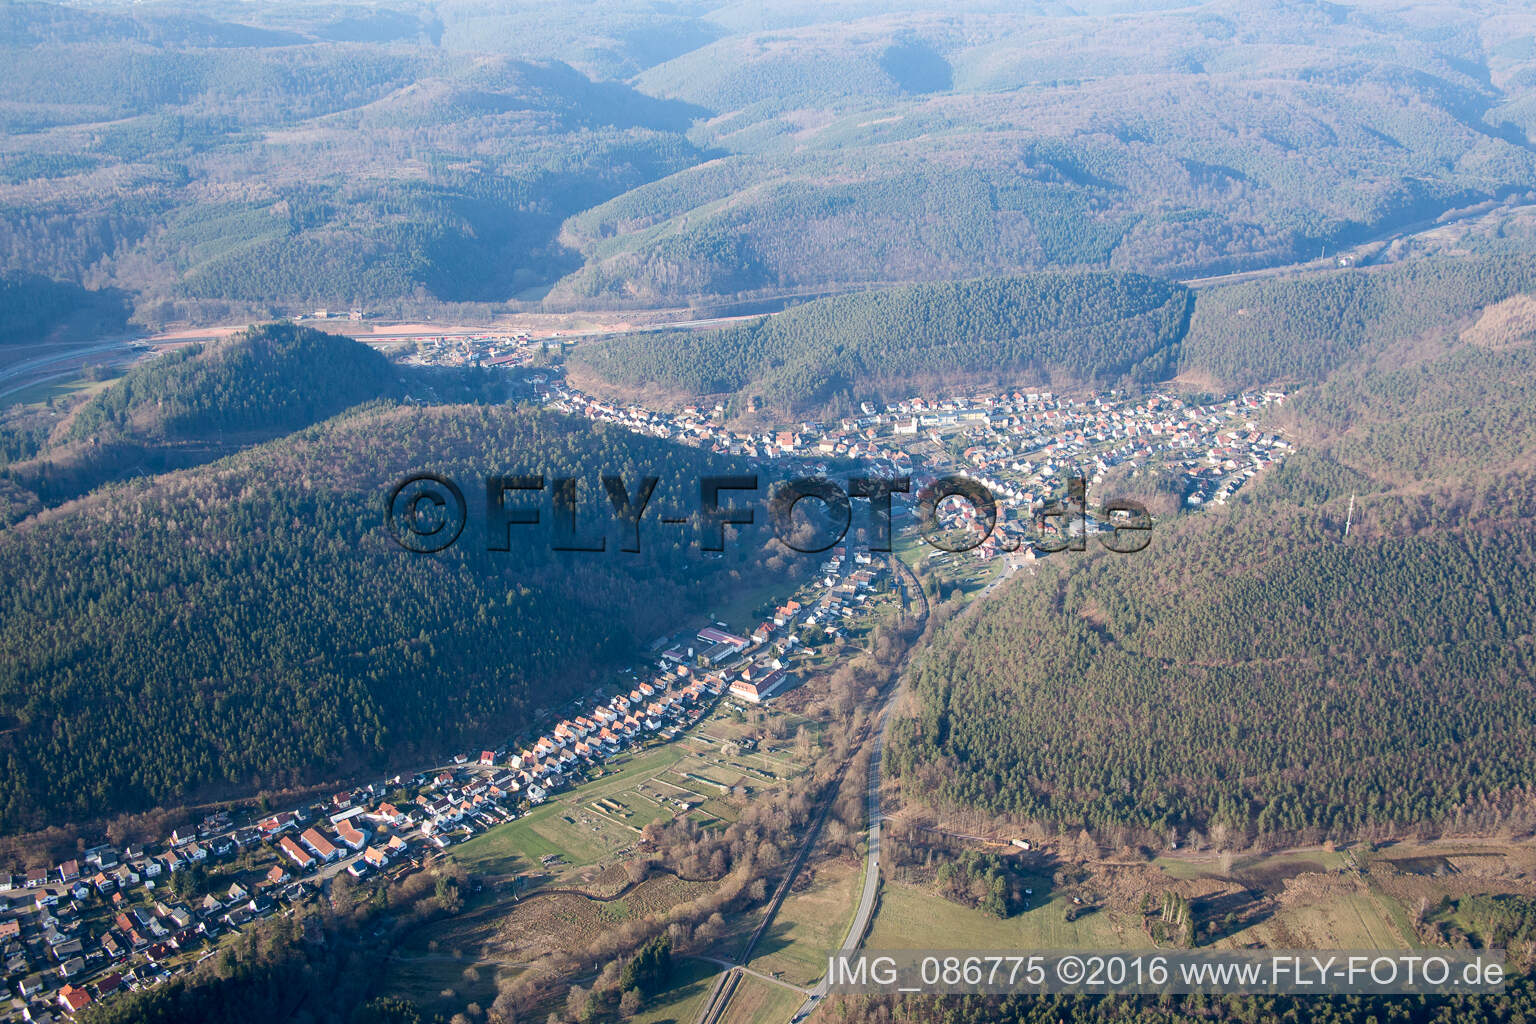 Hinterweidenthal in the state Rhineland-Palatinate, Germany from above